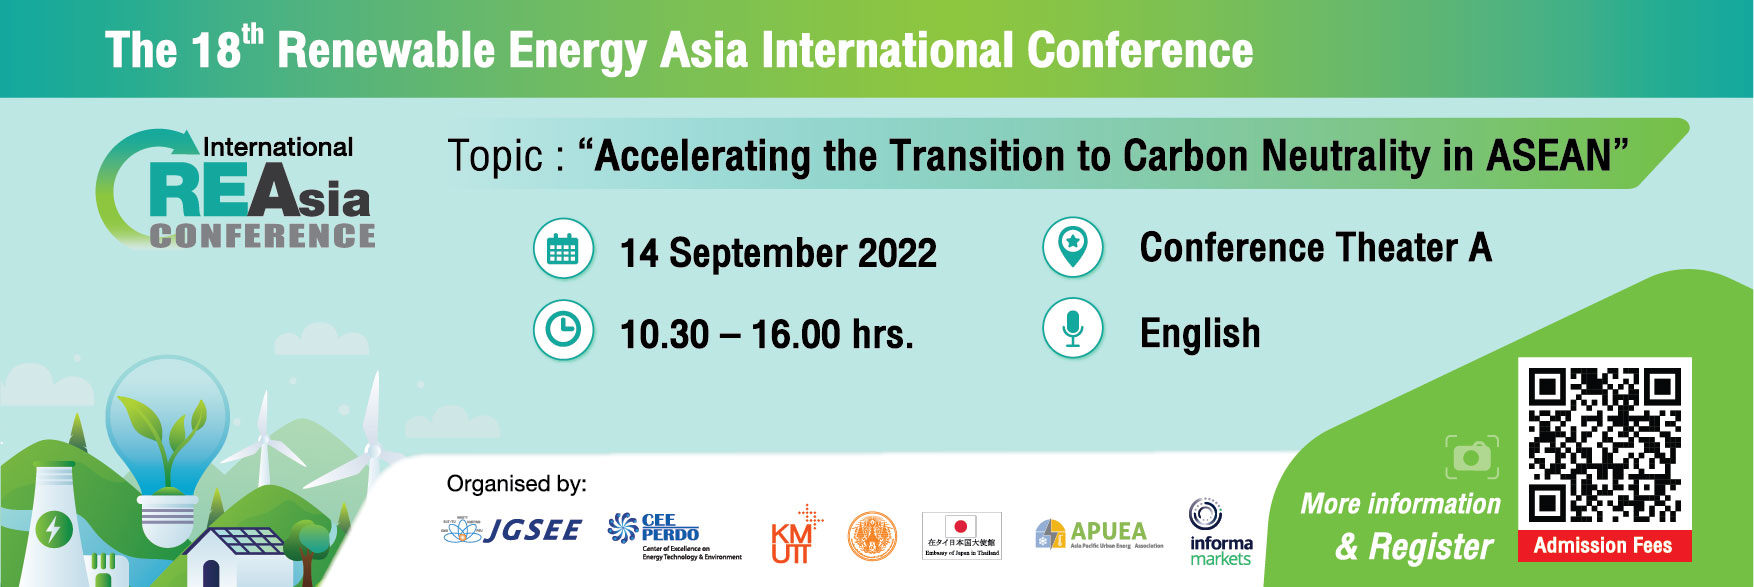 The 16th Renewable Energy Asia International Conference